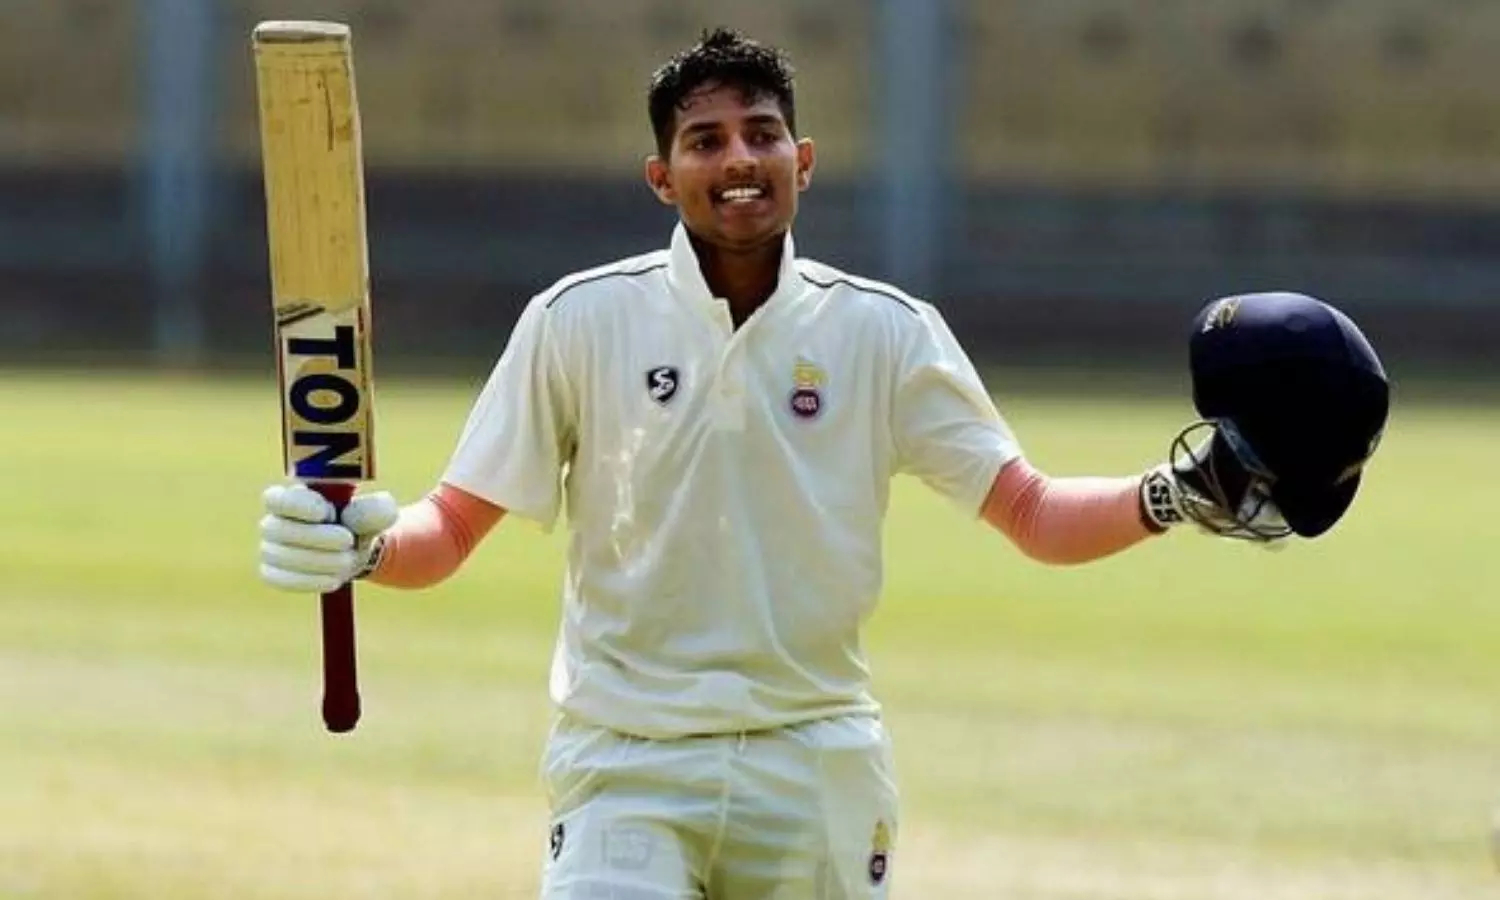 Yash Dhull made twin centuries and one double hundred in his first three FC matches so far | Twitter